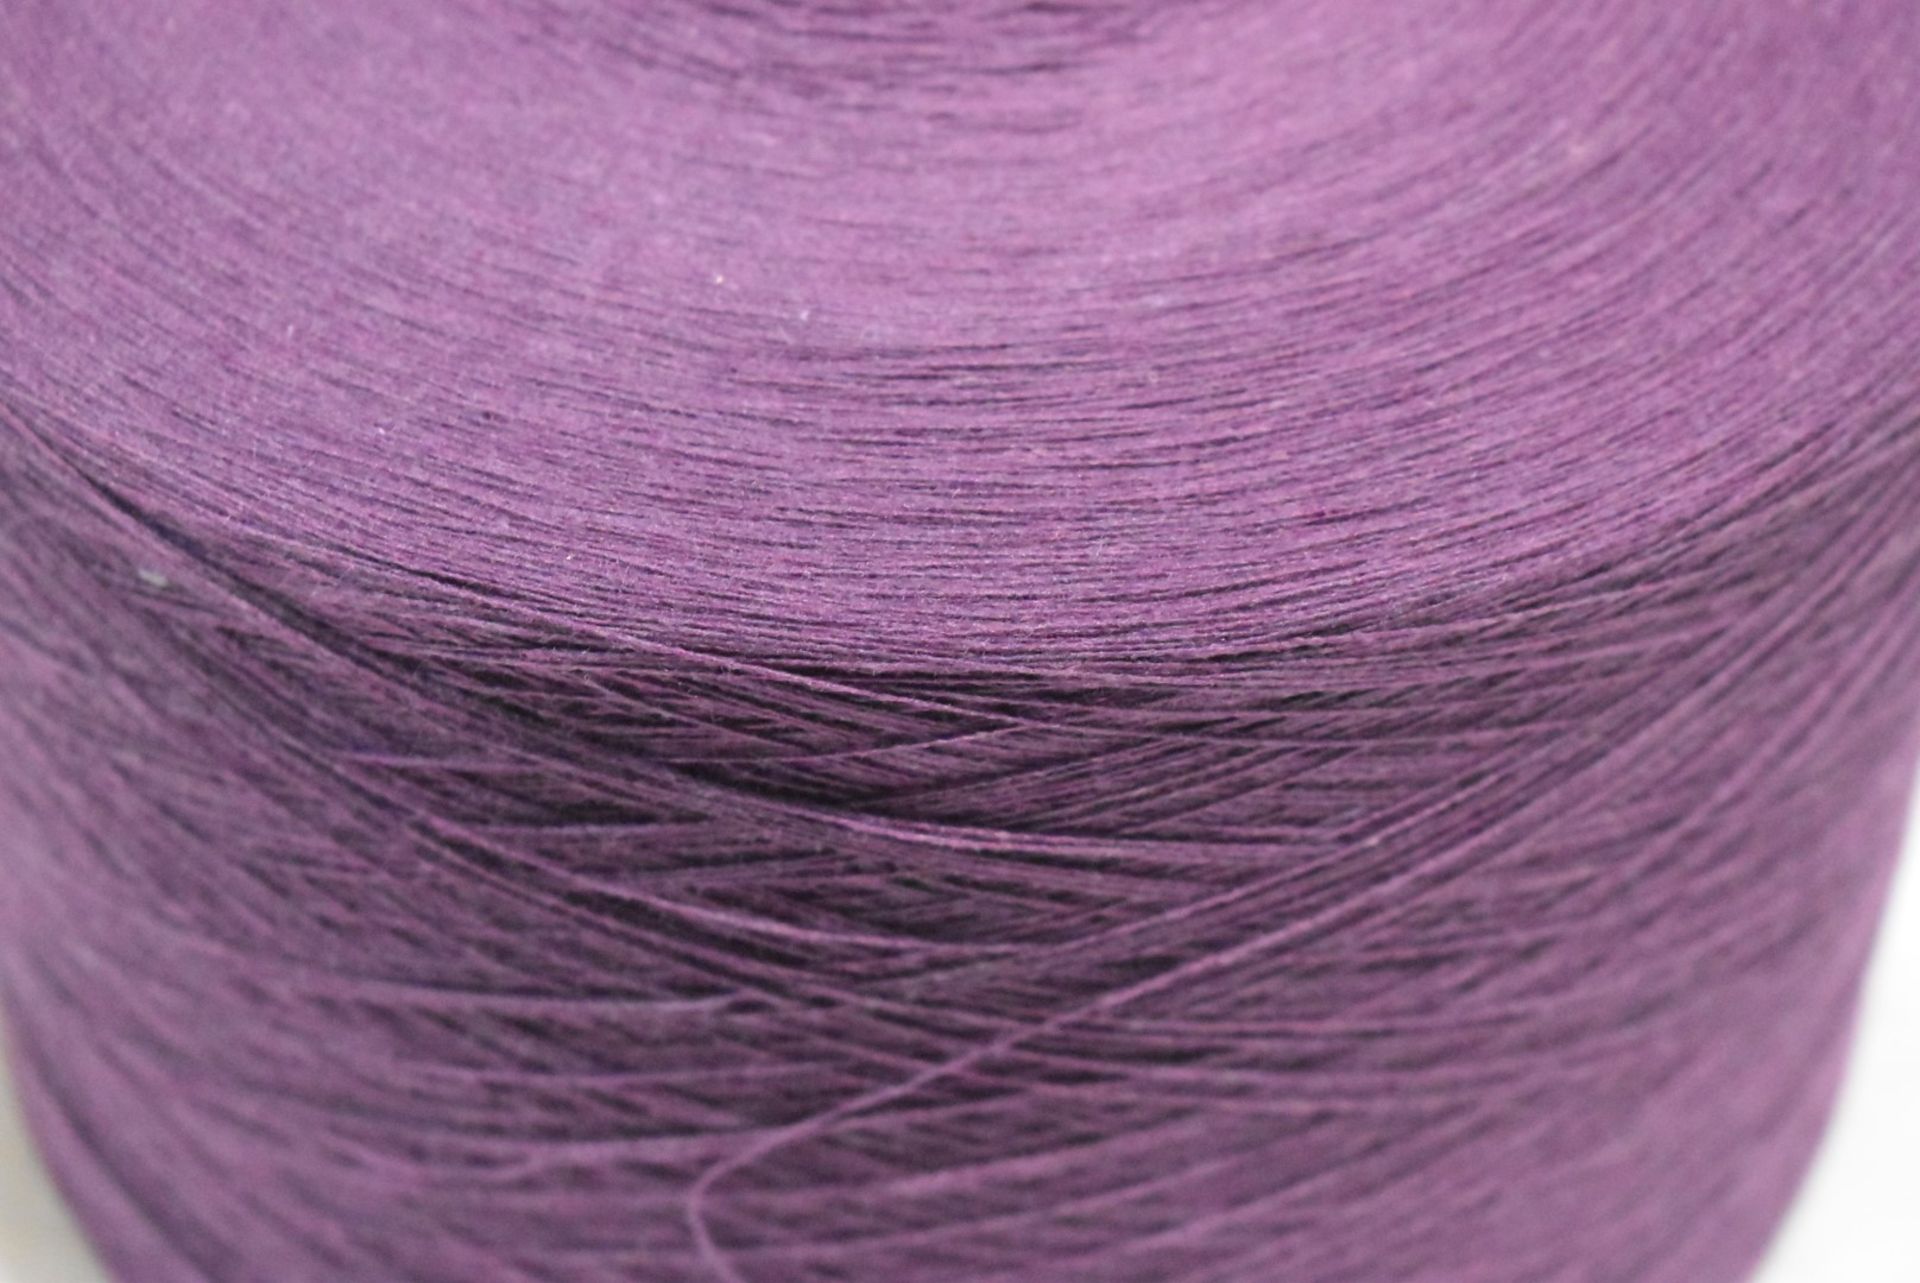 6 x Cones of 1/13 MicroCotton Knitting Yarn - Purple - Approx Weight: 2,300g - New Stock ABL Yarn - Image 3 of 9